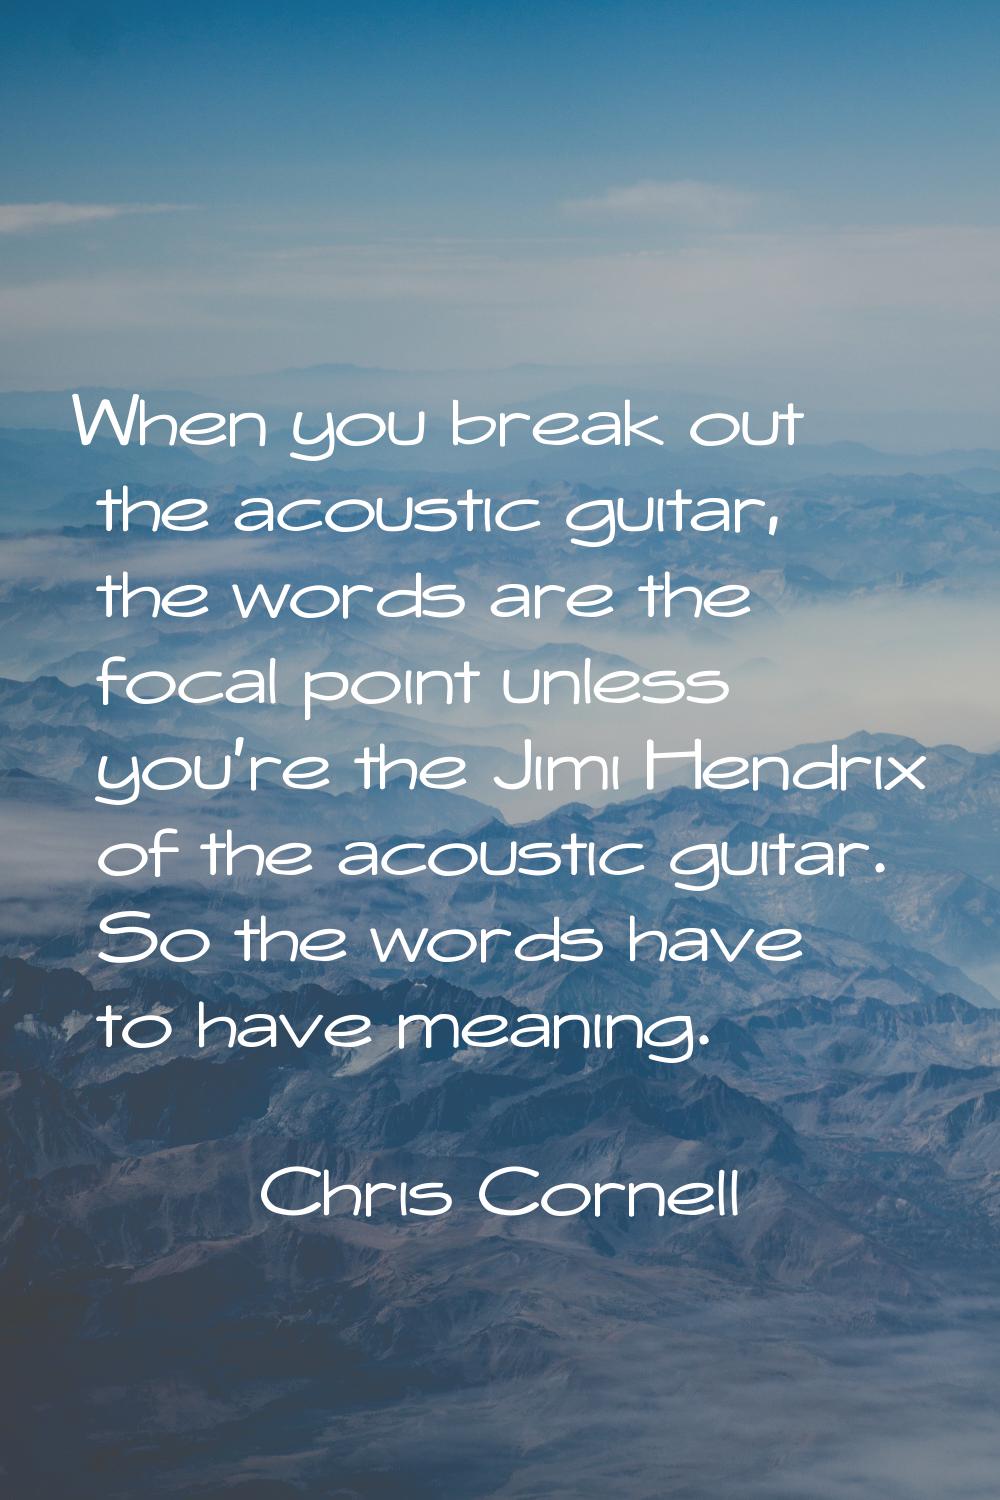 When you break out the acoustic guitar, the words are the focal point unless you're the Jimi Hendri